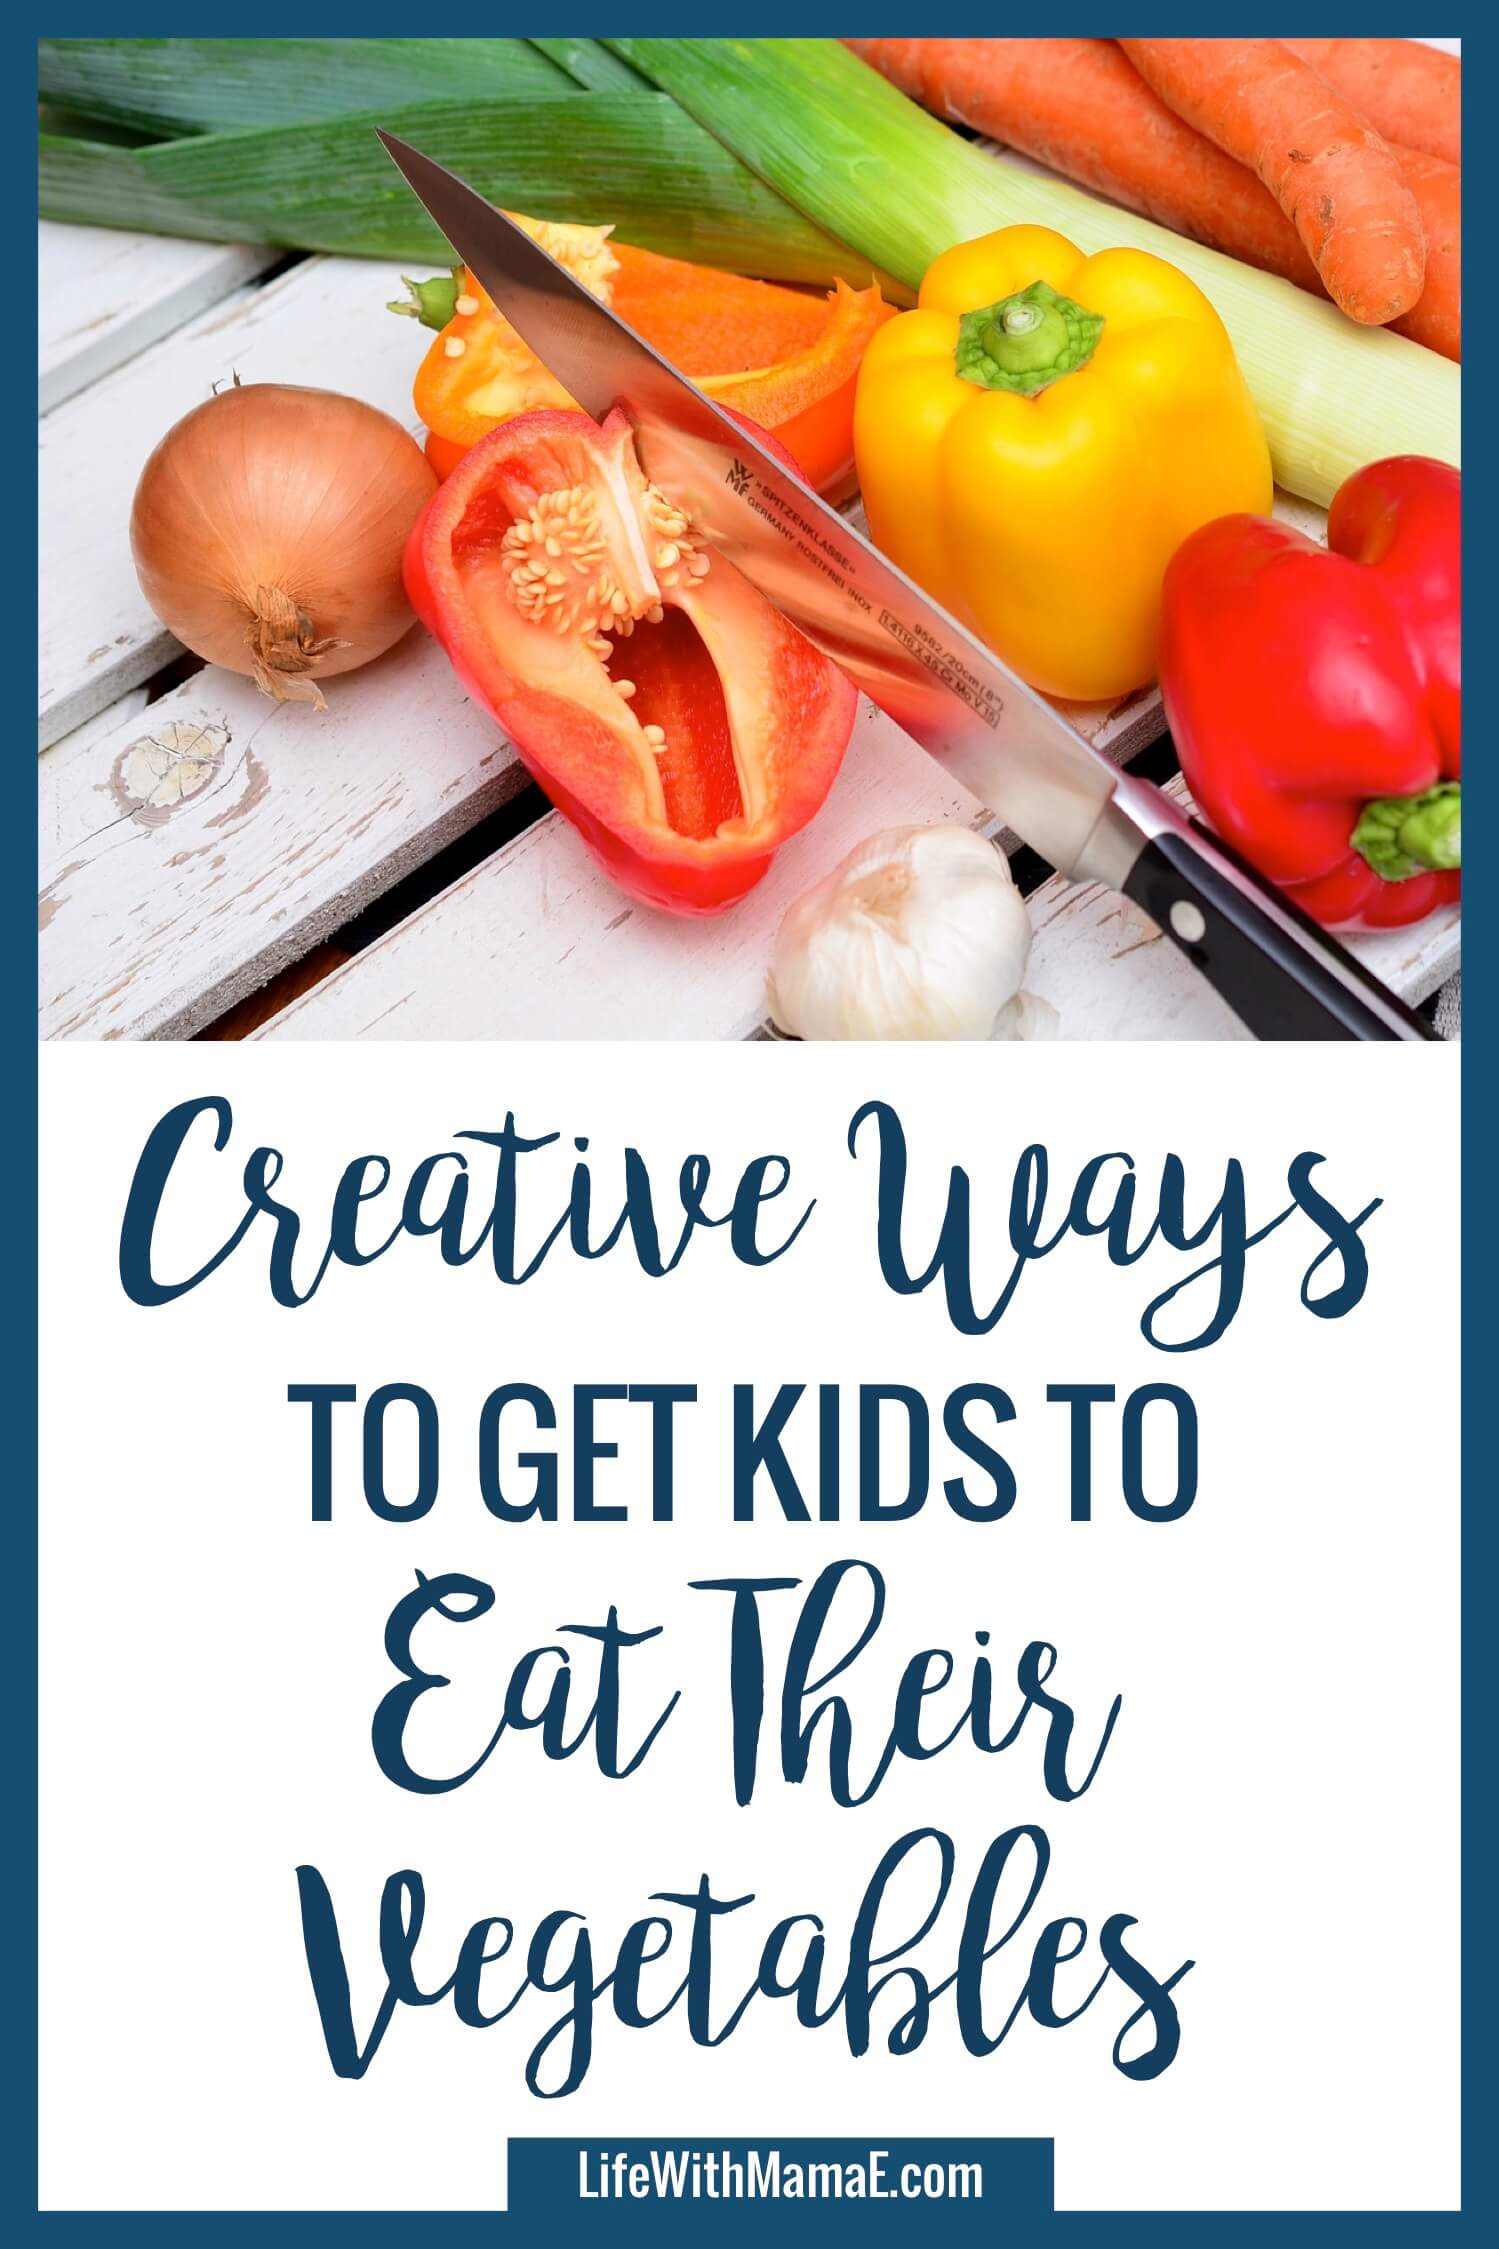 If your kids at picky eaters and you want your kids to eat vegetables, these tips will help! Hidden veggies can be fun, but these other creative ways may just entice your kids.